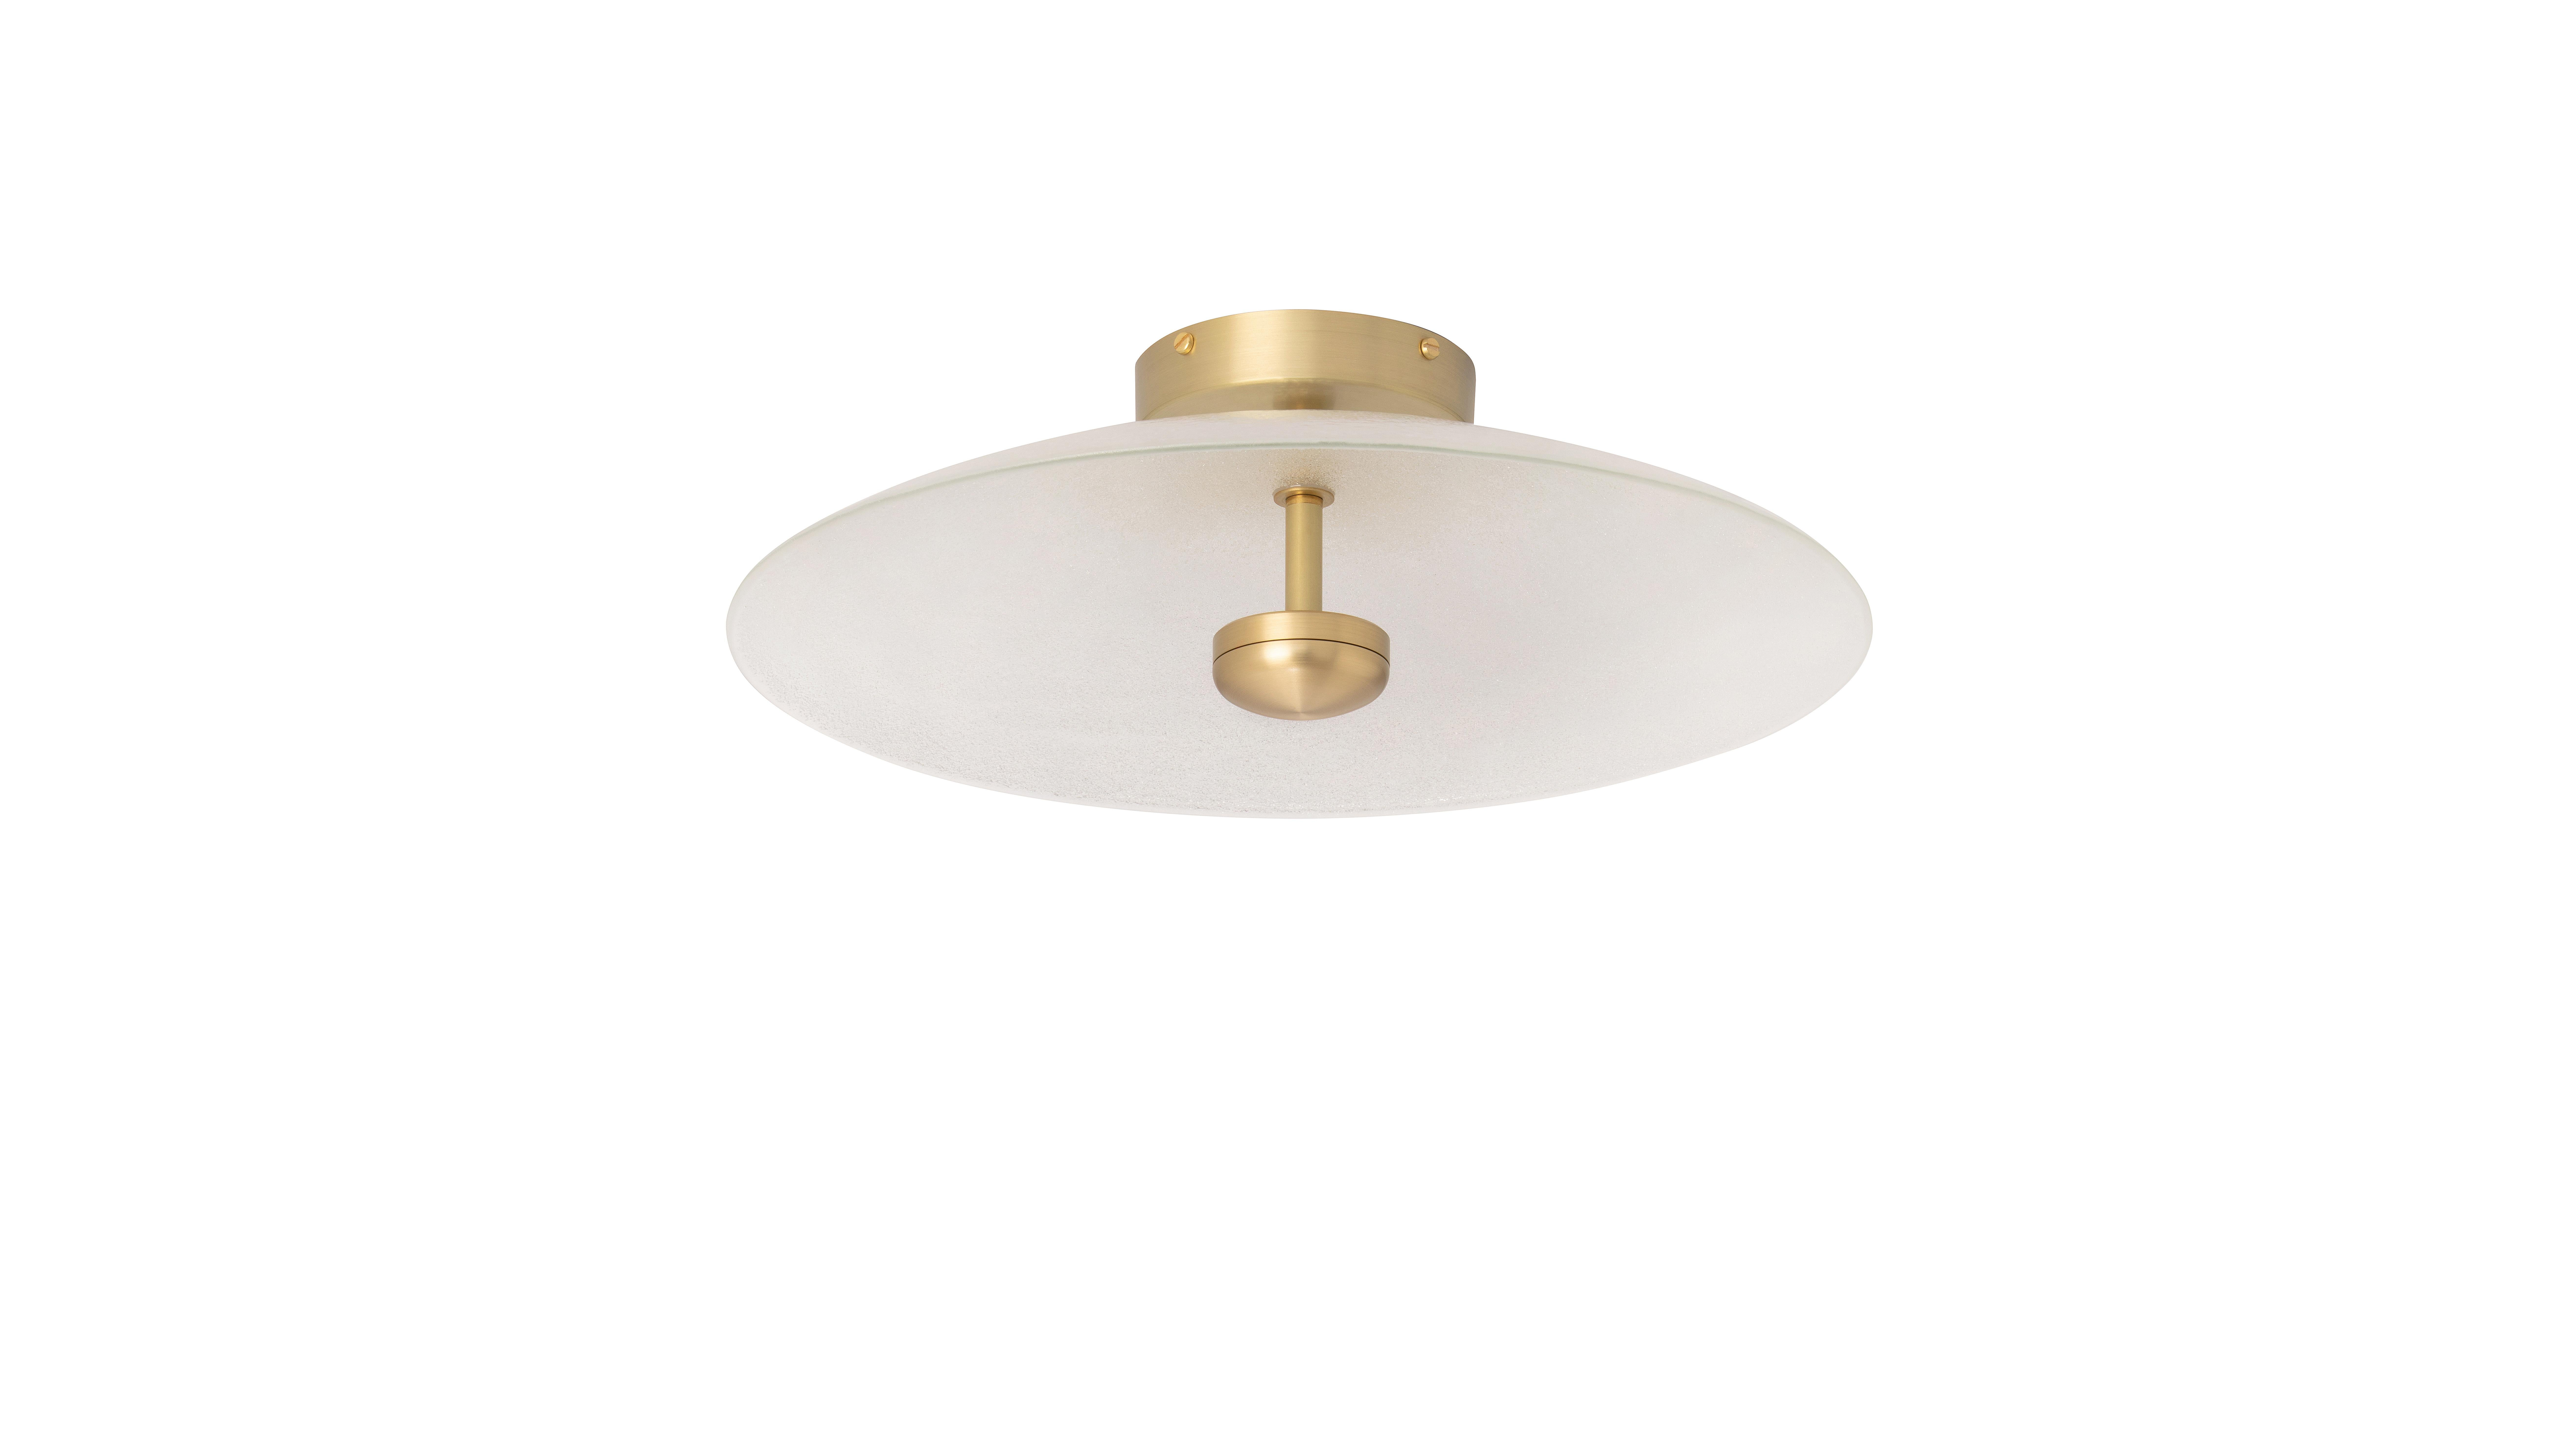 Brass Cielo large ceiling lamp by CTO Lighting
Materials: brass with hand fritted glass
Dimensions: W 38.5 x D 38.5 x H 13 cm

Integrated LED - trailing dimmable - 8w - 2700k 
Weight 4.5kg (9.9lbs)
Mounts onto 4” junction box

All our lamps